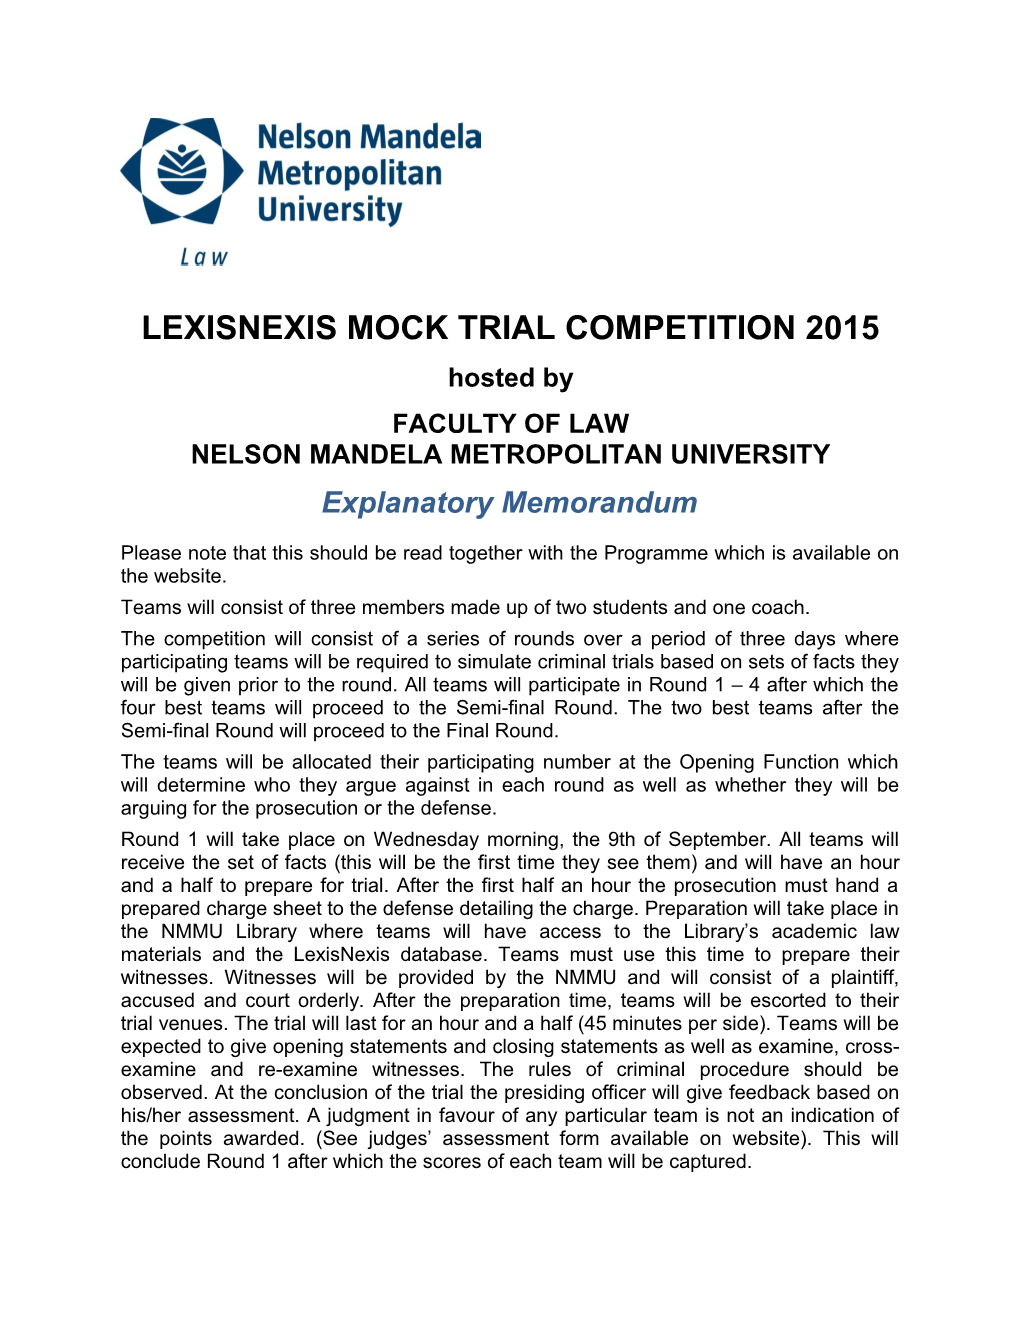 Lexisnexis Mock Trial Competition 2015